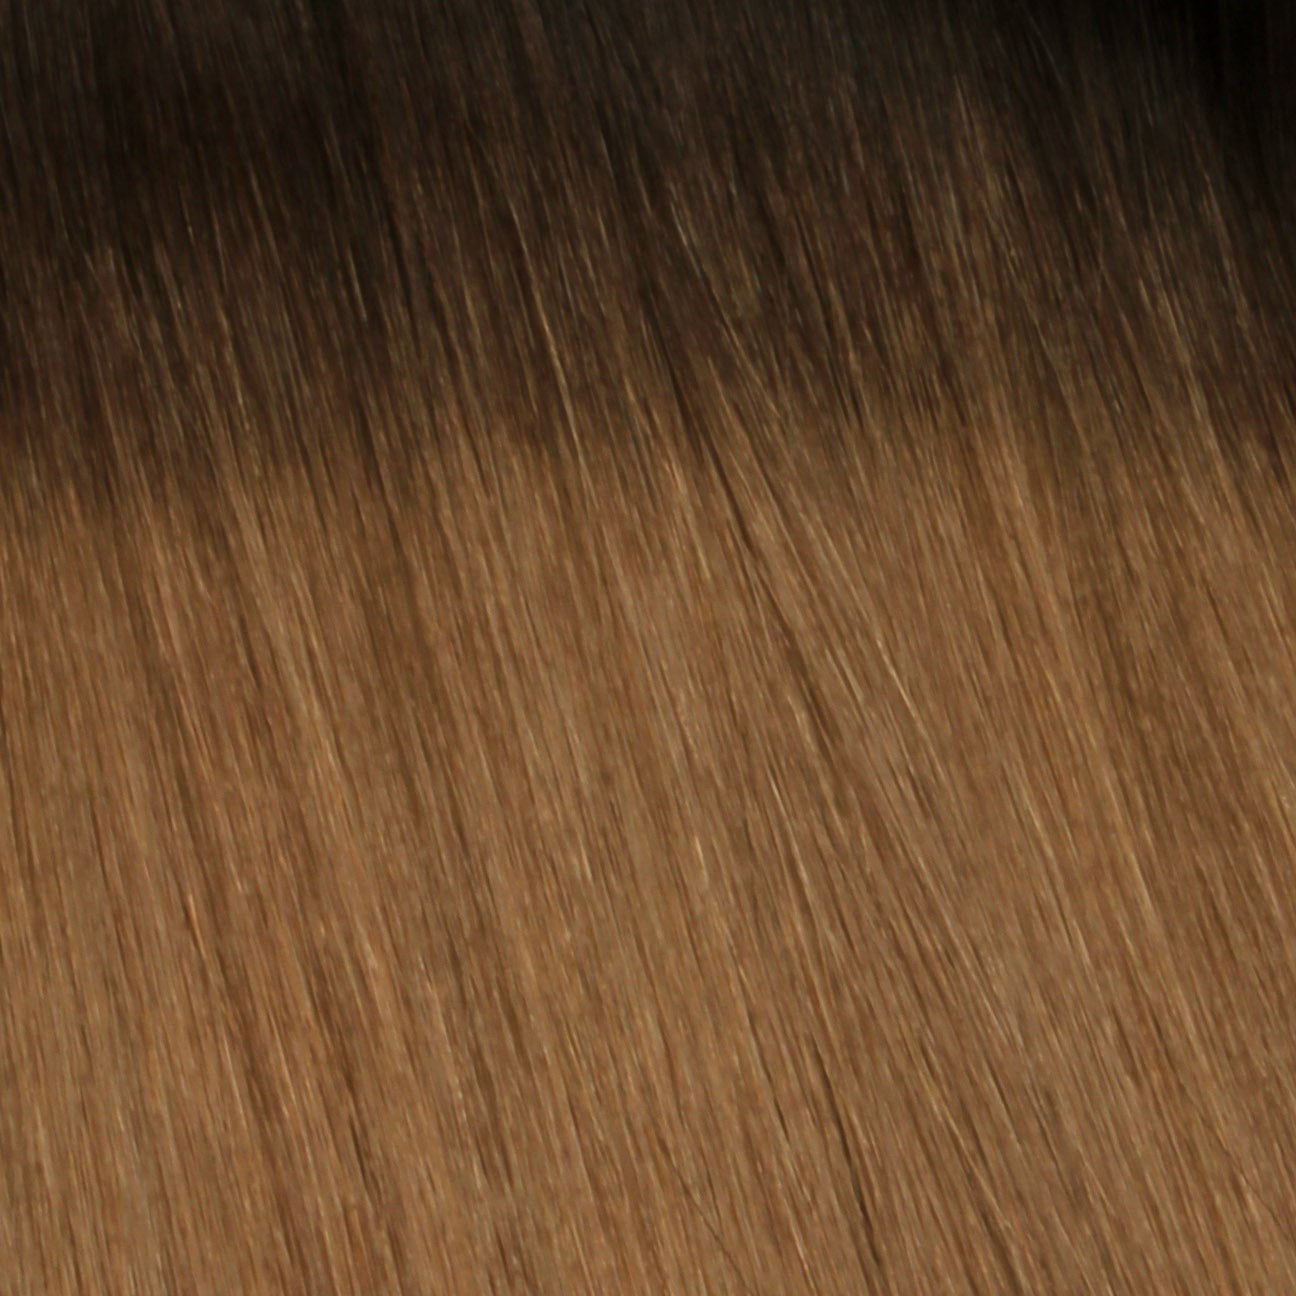 Nano Bonds 18 Inches - SWAY Hair Extensions Rooted-Chestnut-Brown-Mix-R2-4-6 Ultra-fine, invisible bonds for a flawless, natural look. 100% Remy Human hair, lightweight and versatile. Reusable and perfect for individual or salon use.